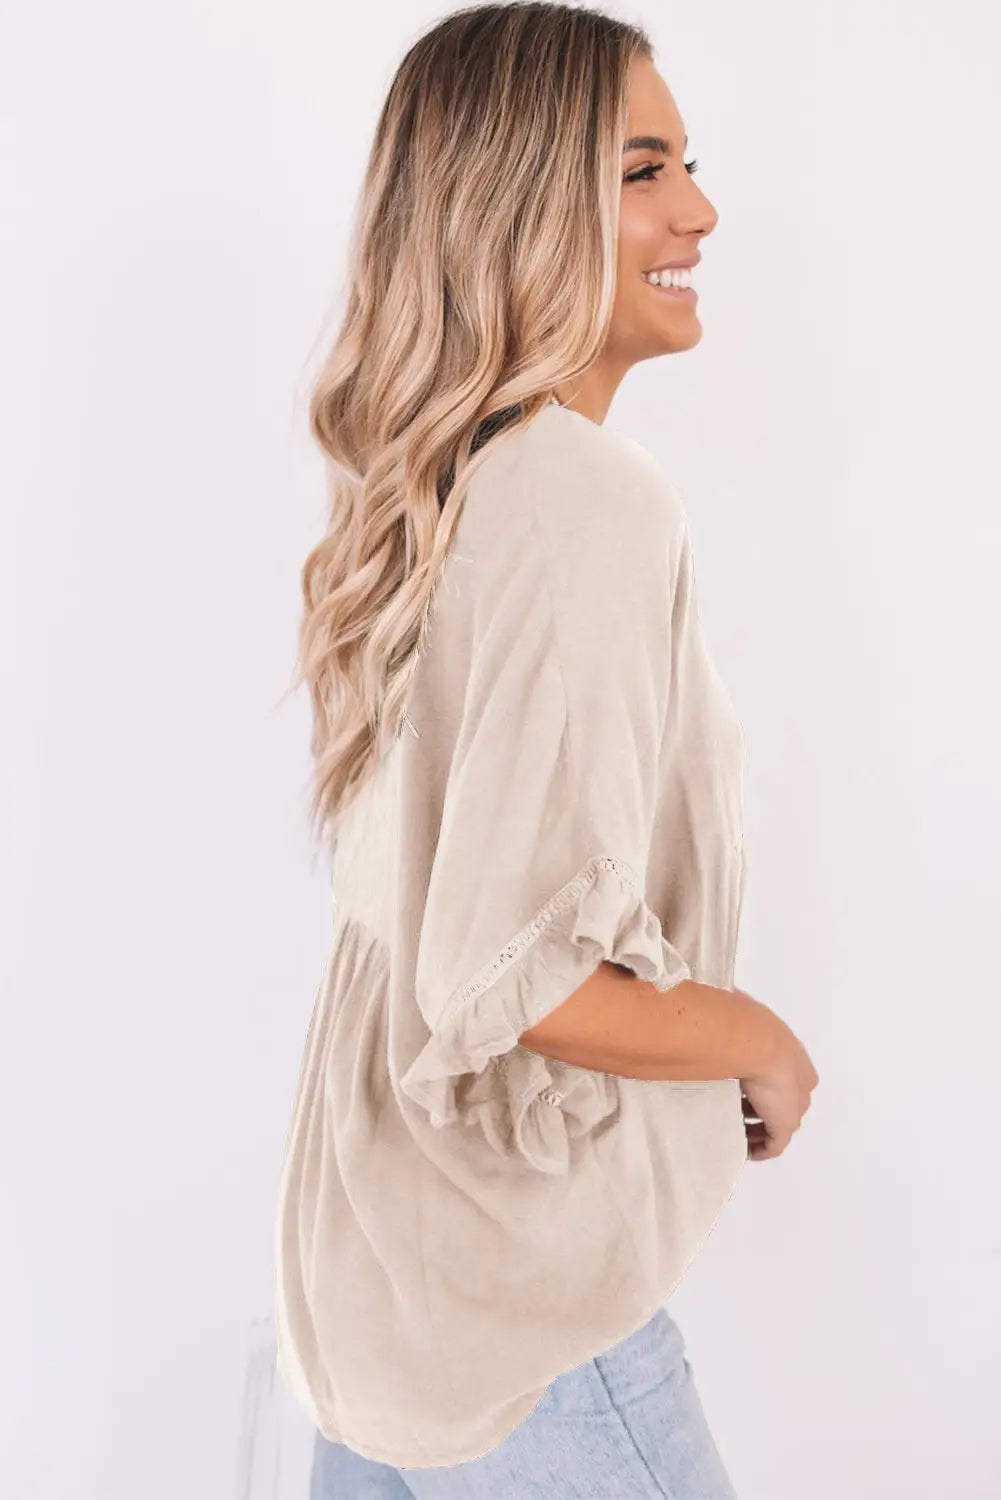 Apricot ruffled lace detail loose v neck top - tops